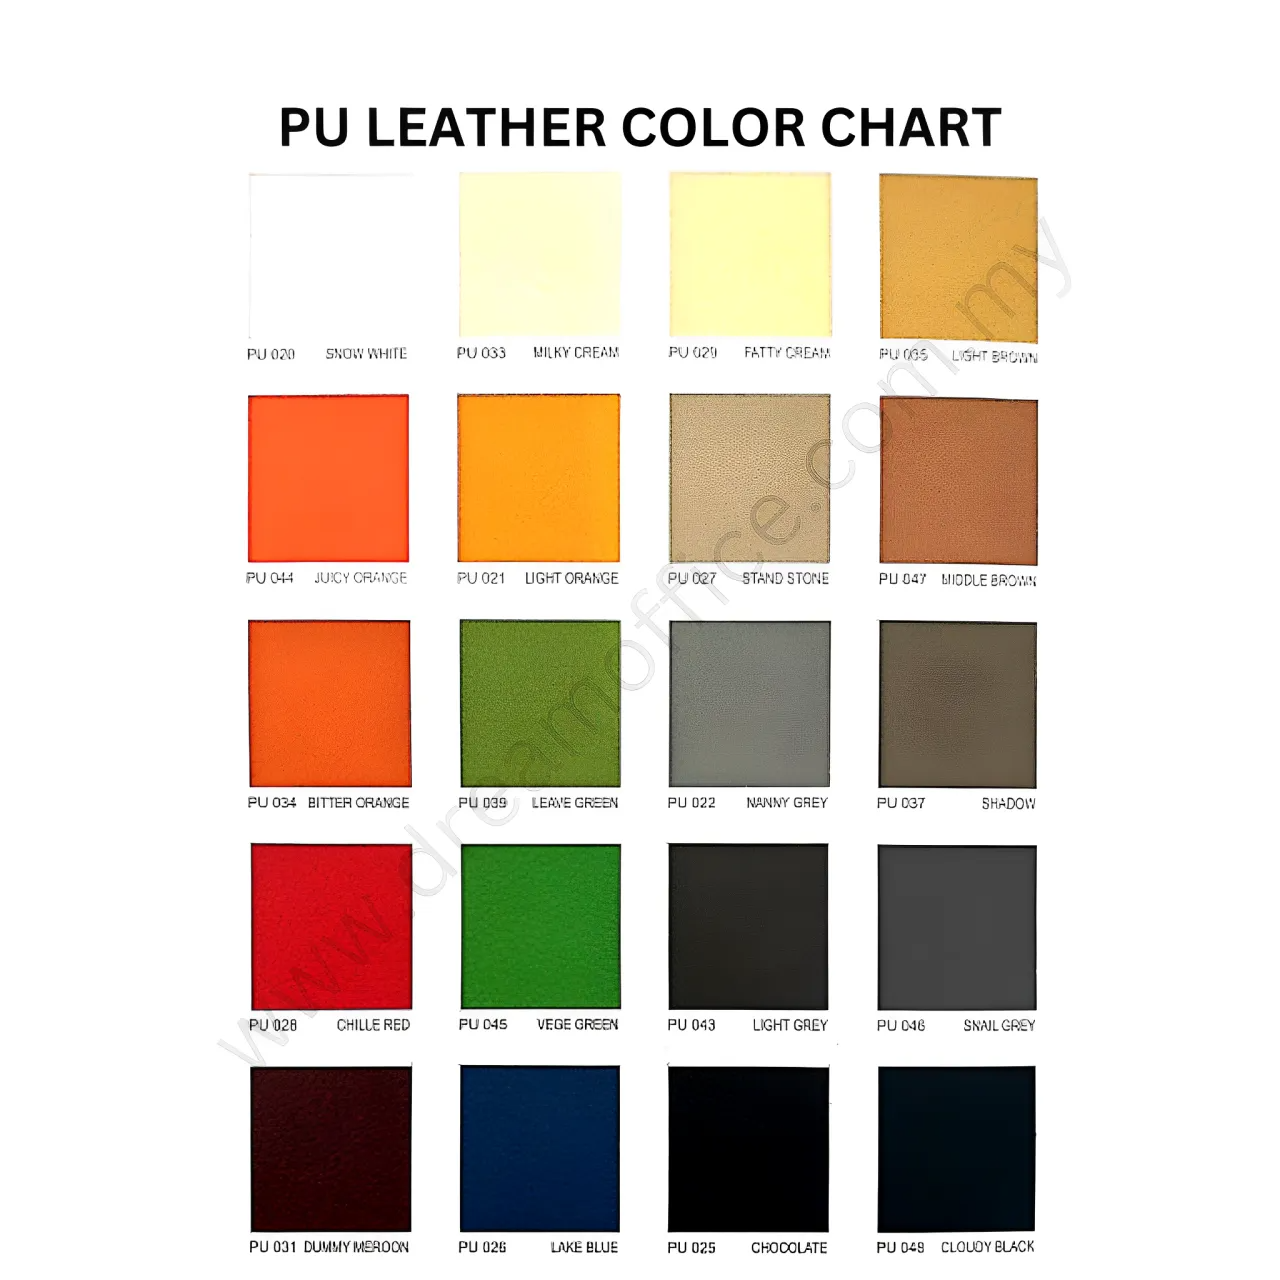 BP PU LEATHER COLOR CHART